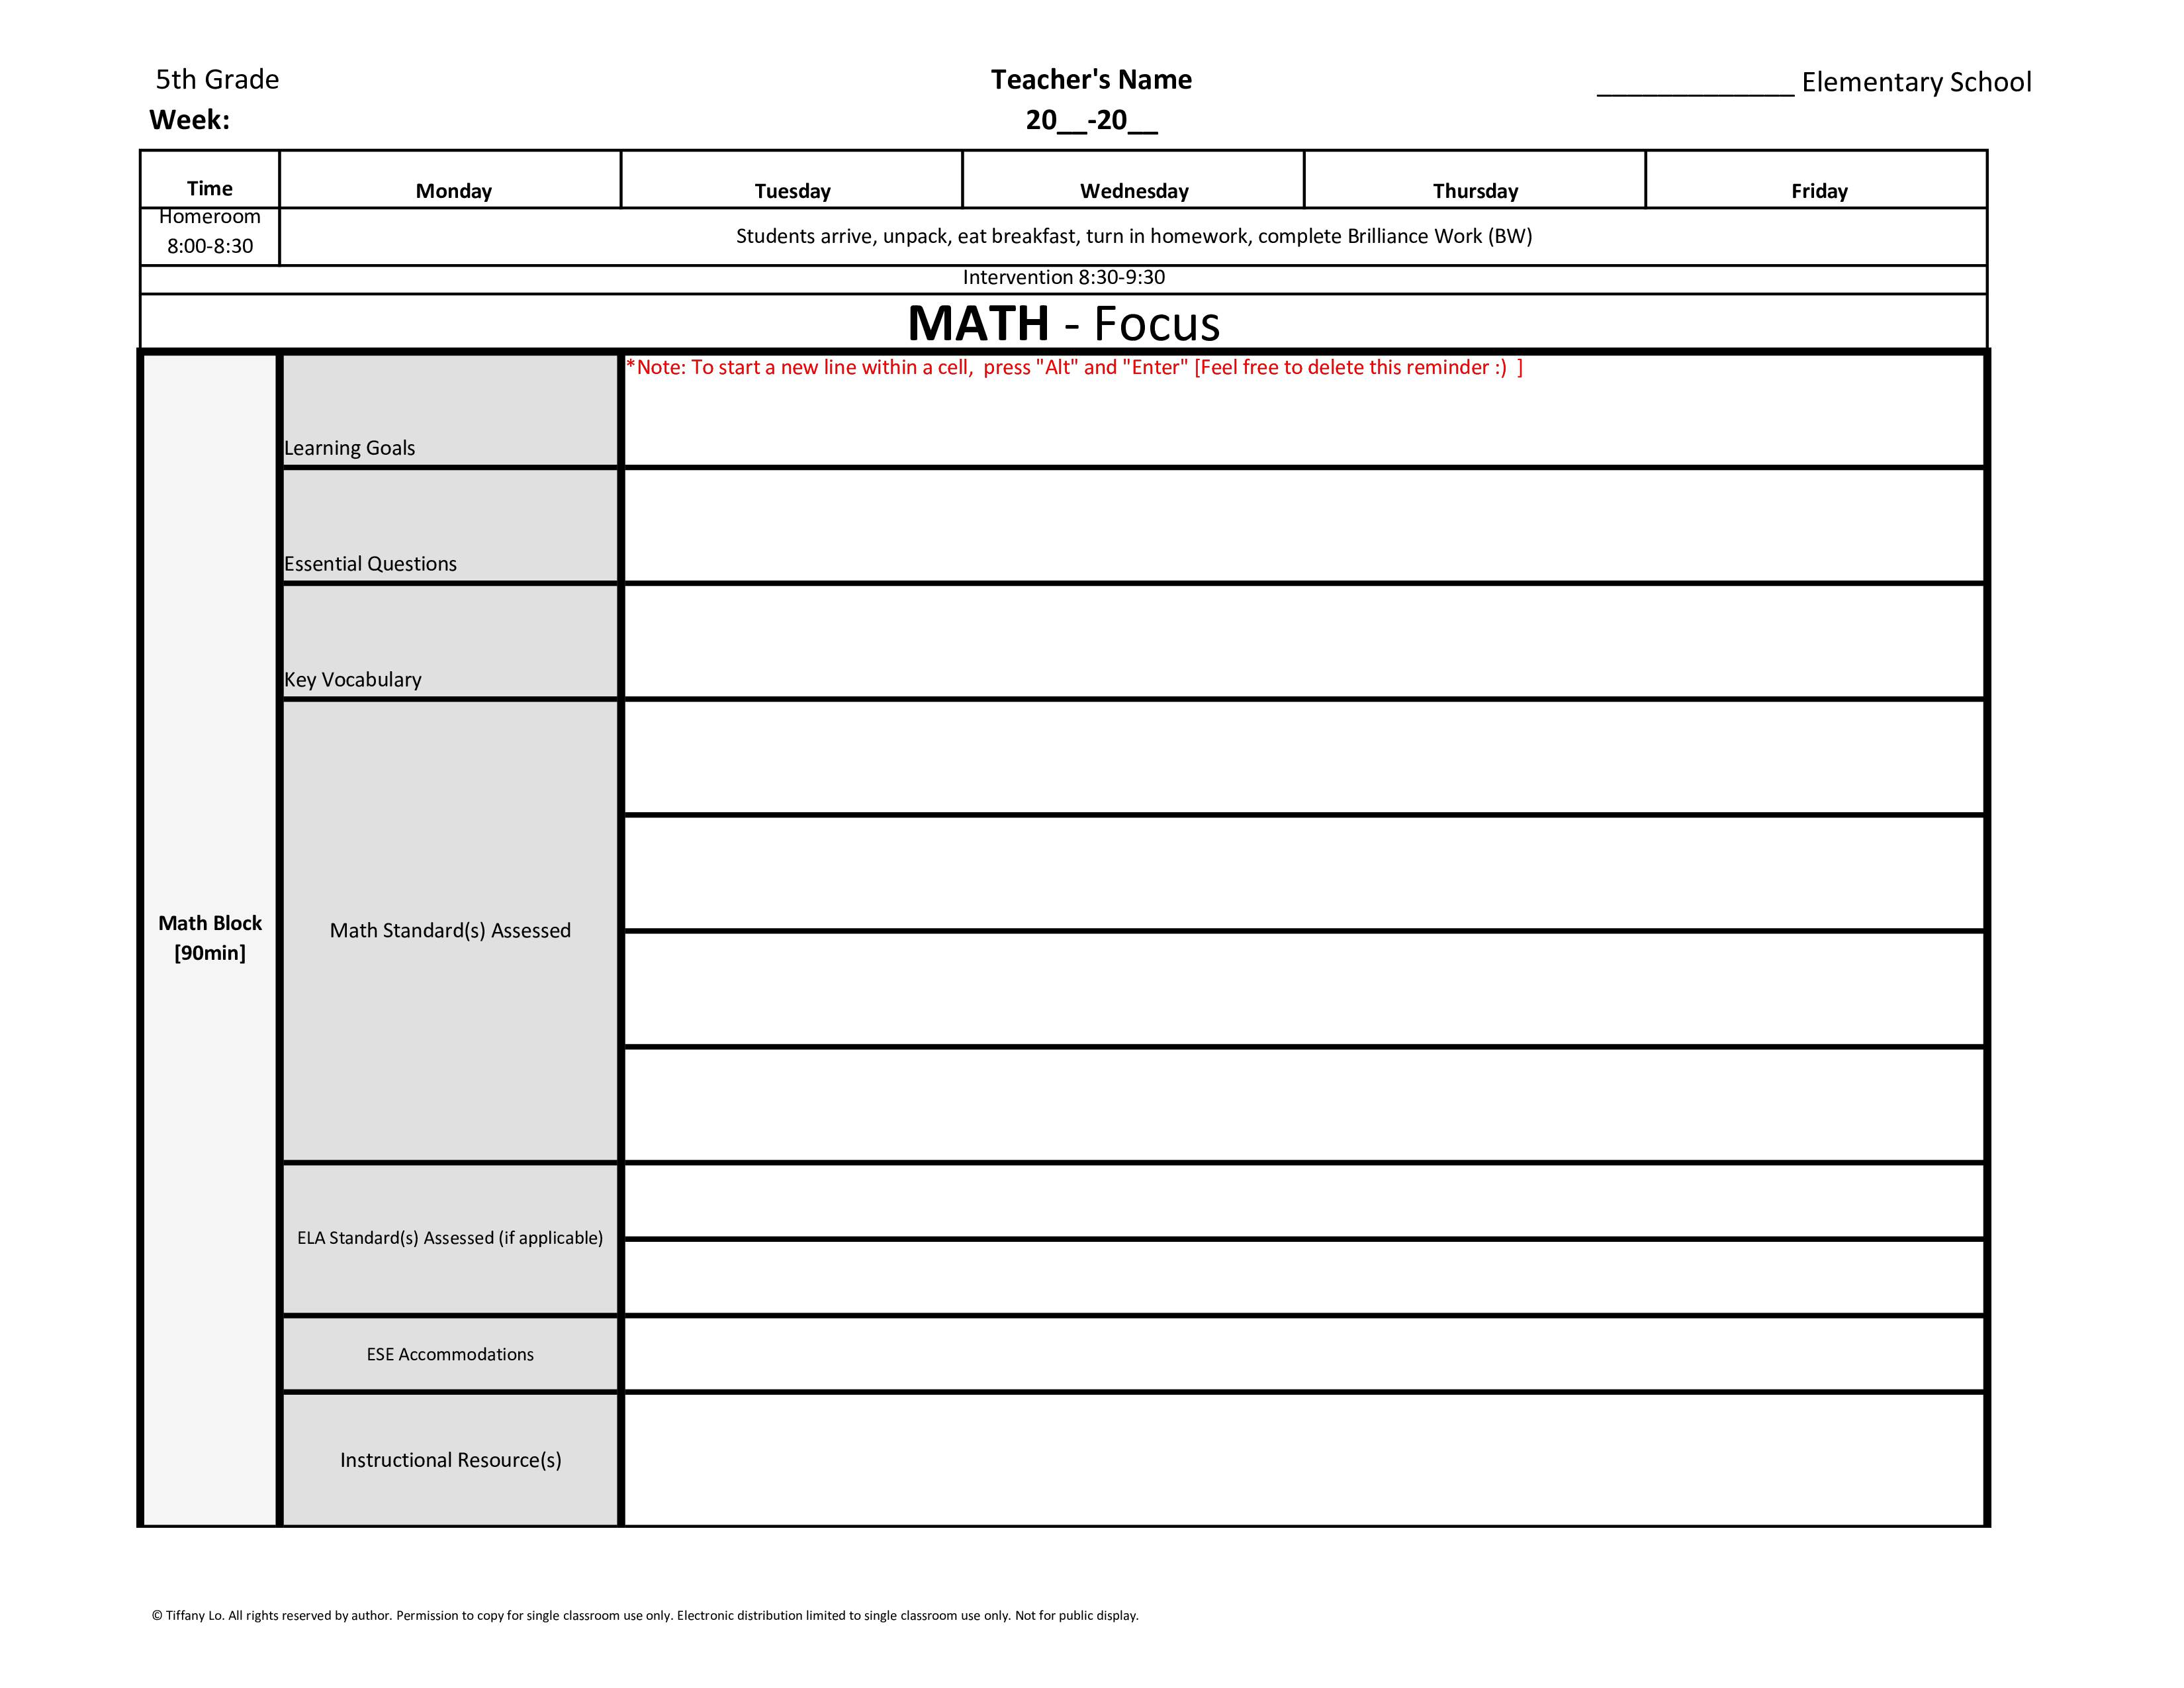 5th-fifth-grade-common-core-weekly-lesson-plan-template-w-drop-down